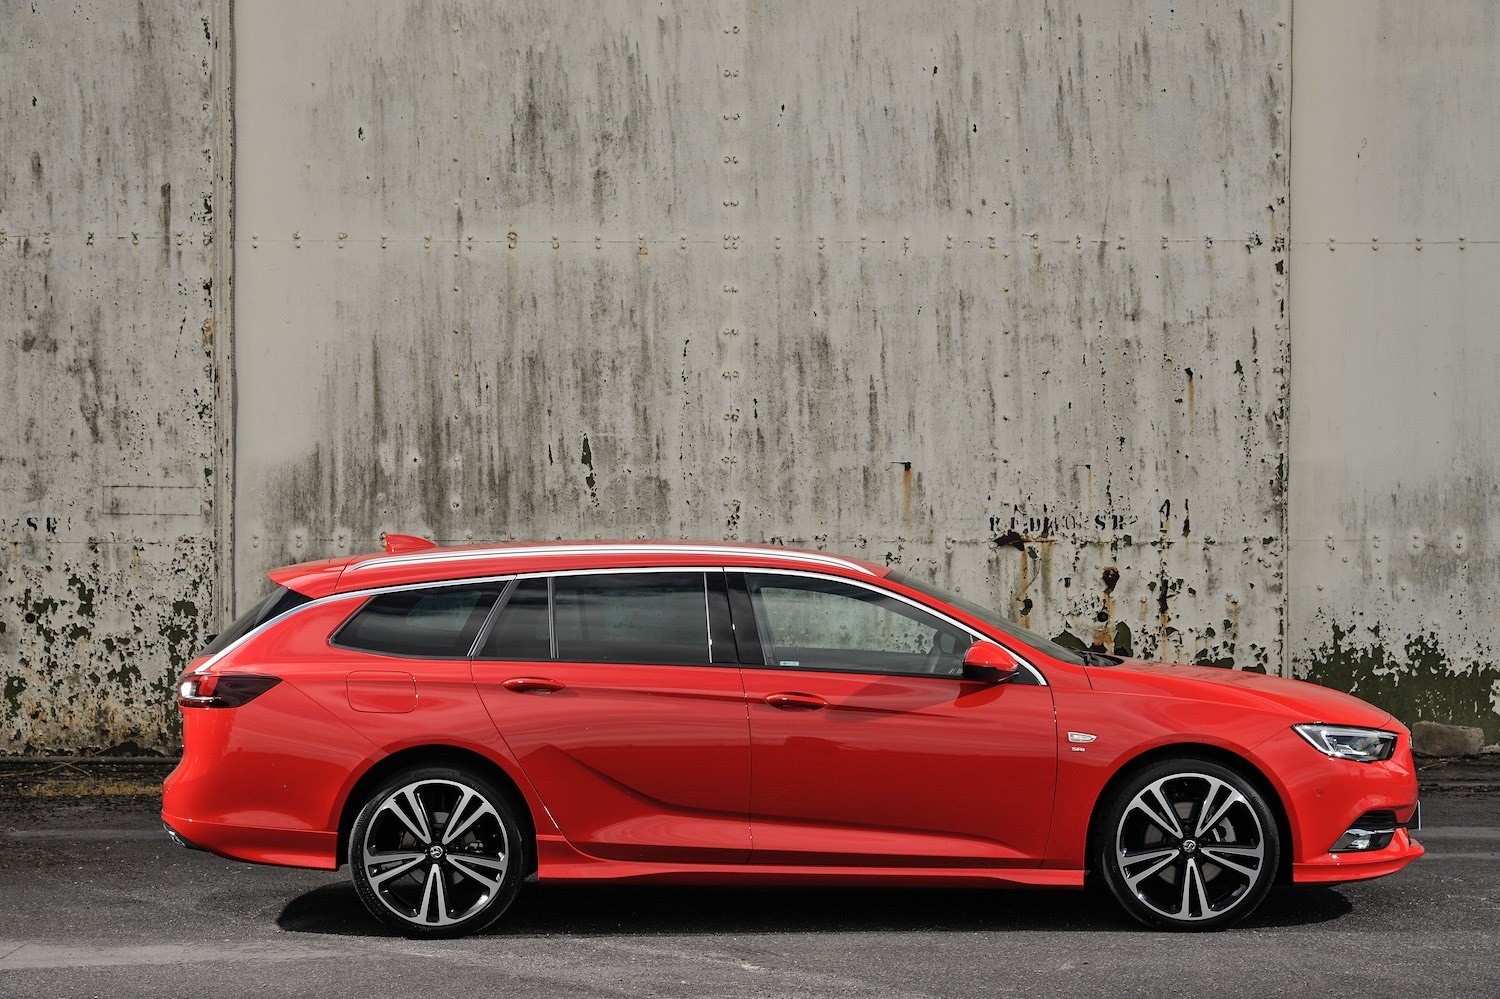 drive-Tom Scanlan Reviews the New Vauxhall Insignia Sports Tourer 16